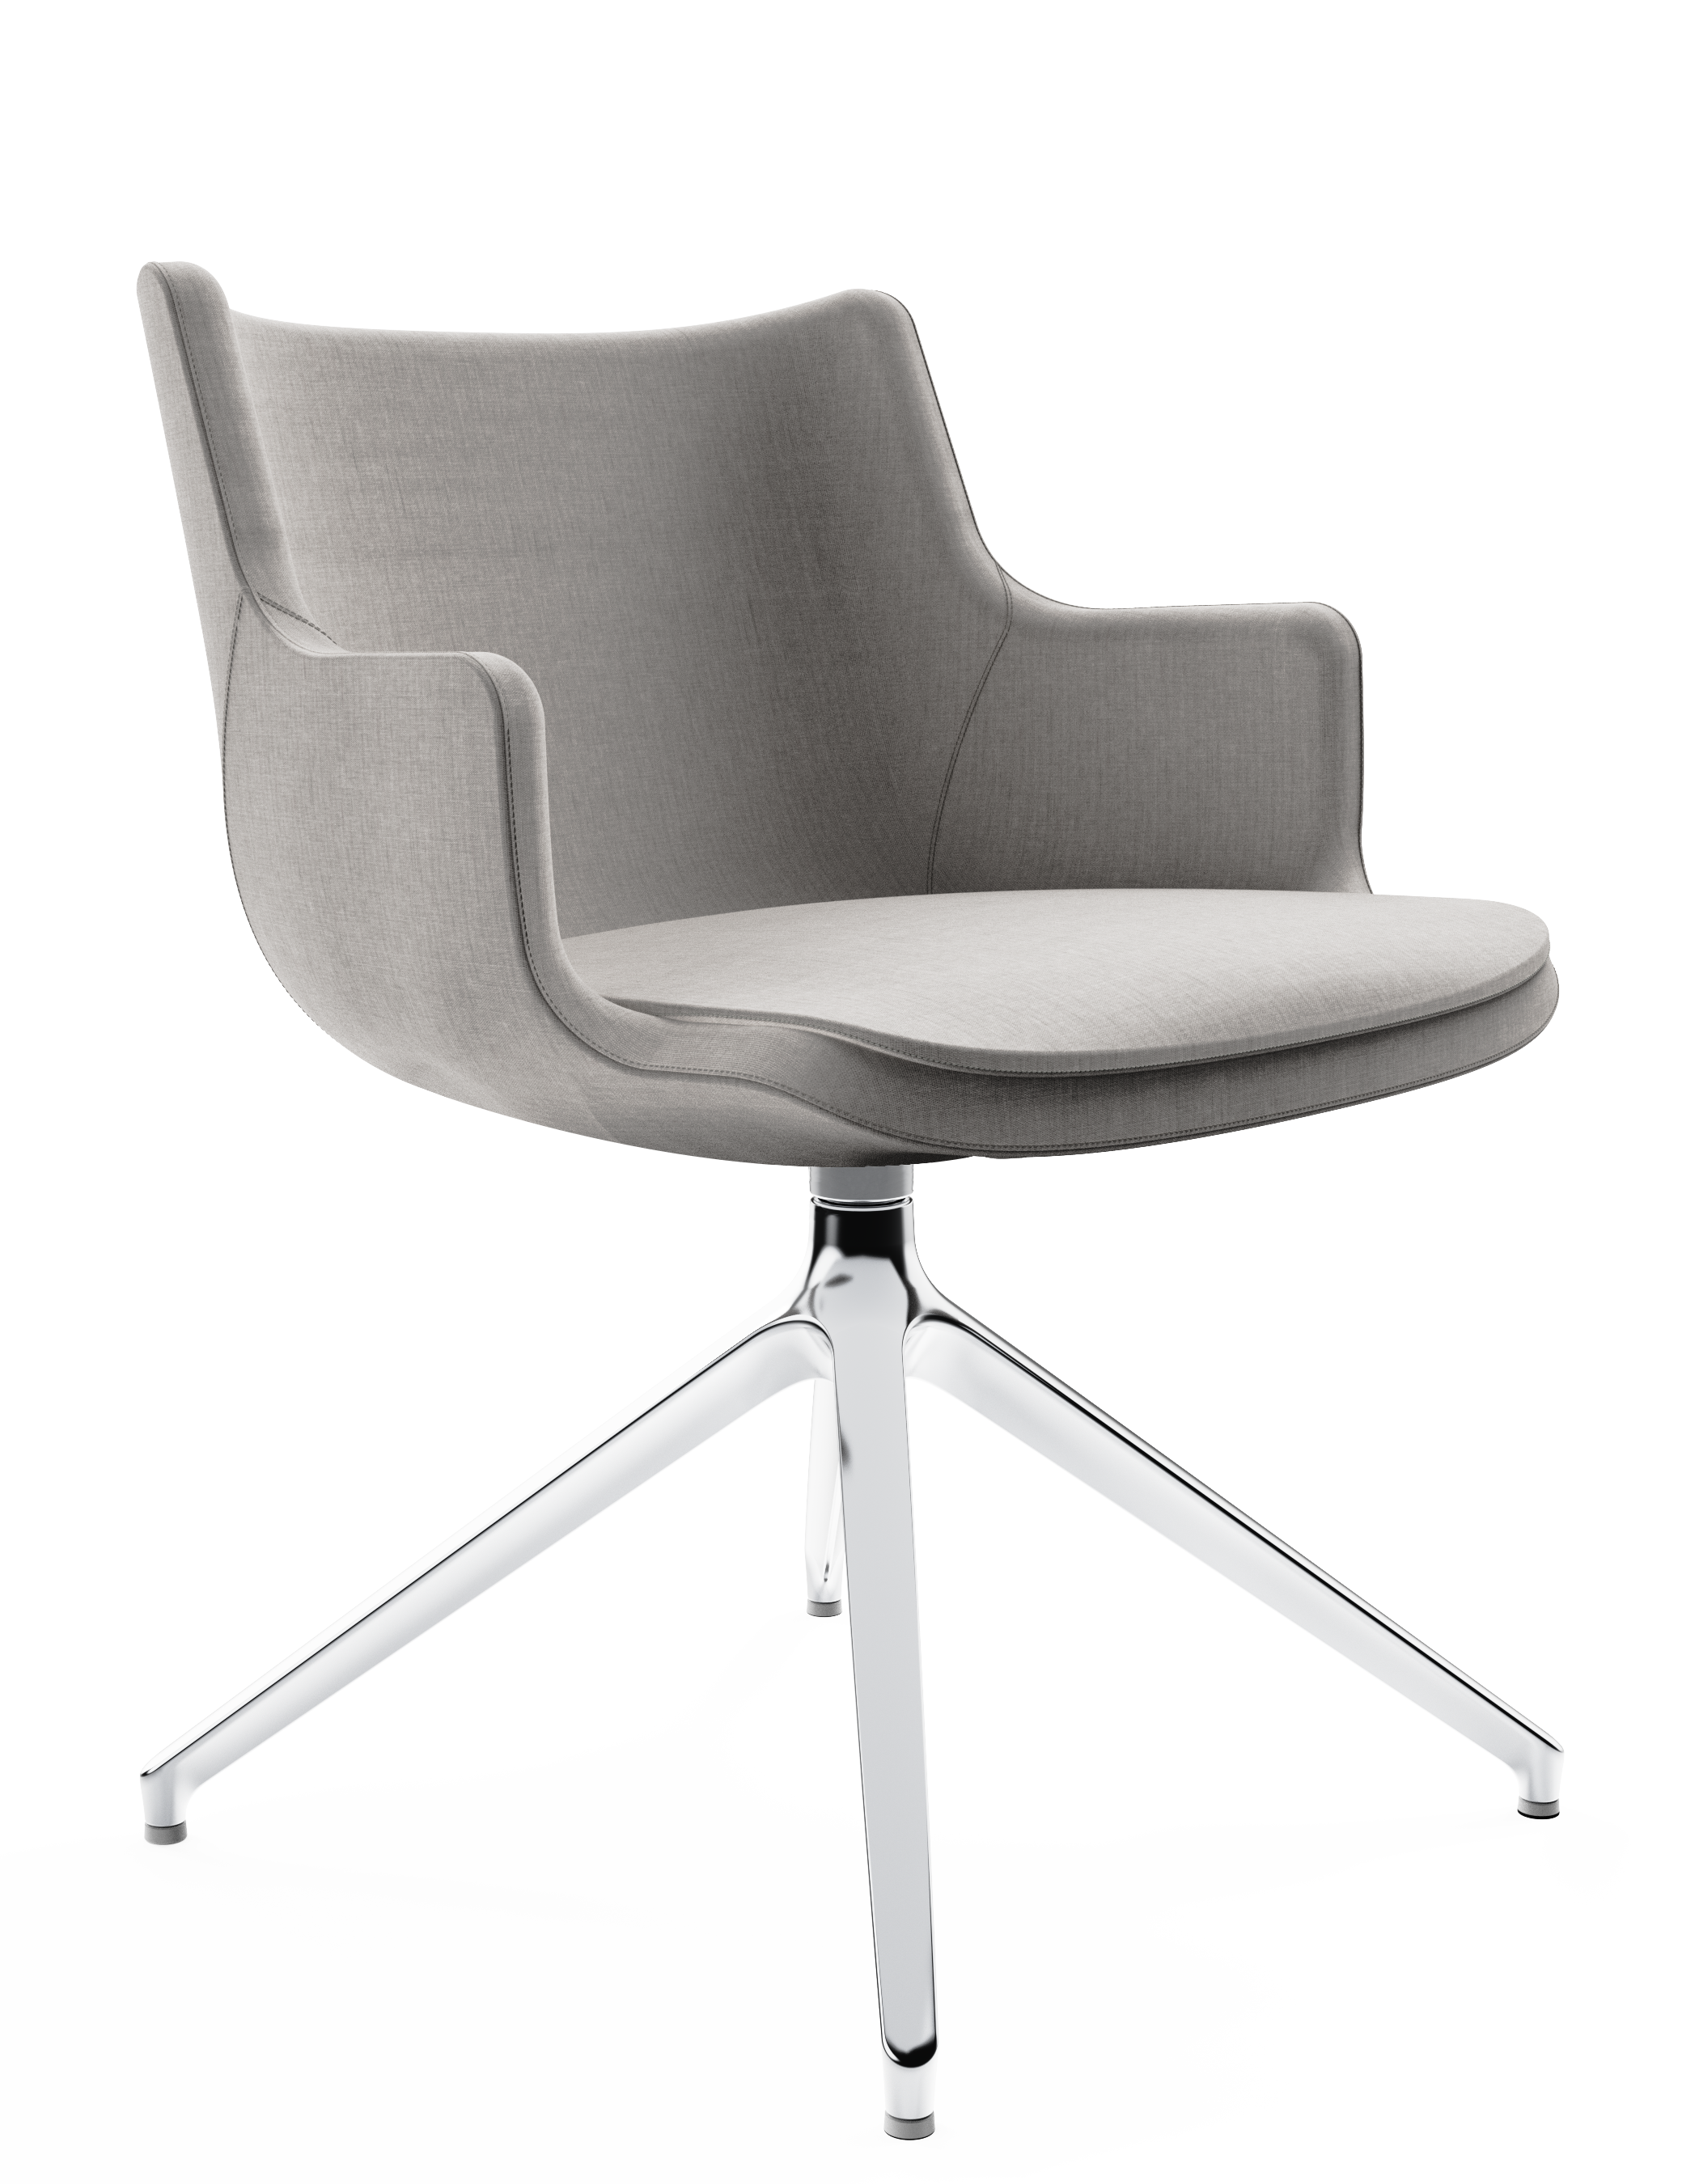 WS - Contour chair - Low, 4 star polished base (Front angle)